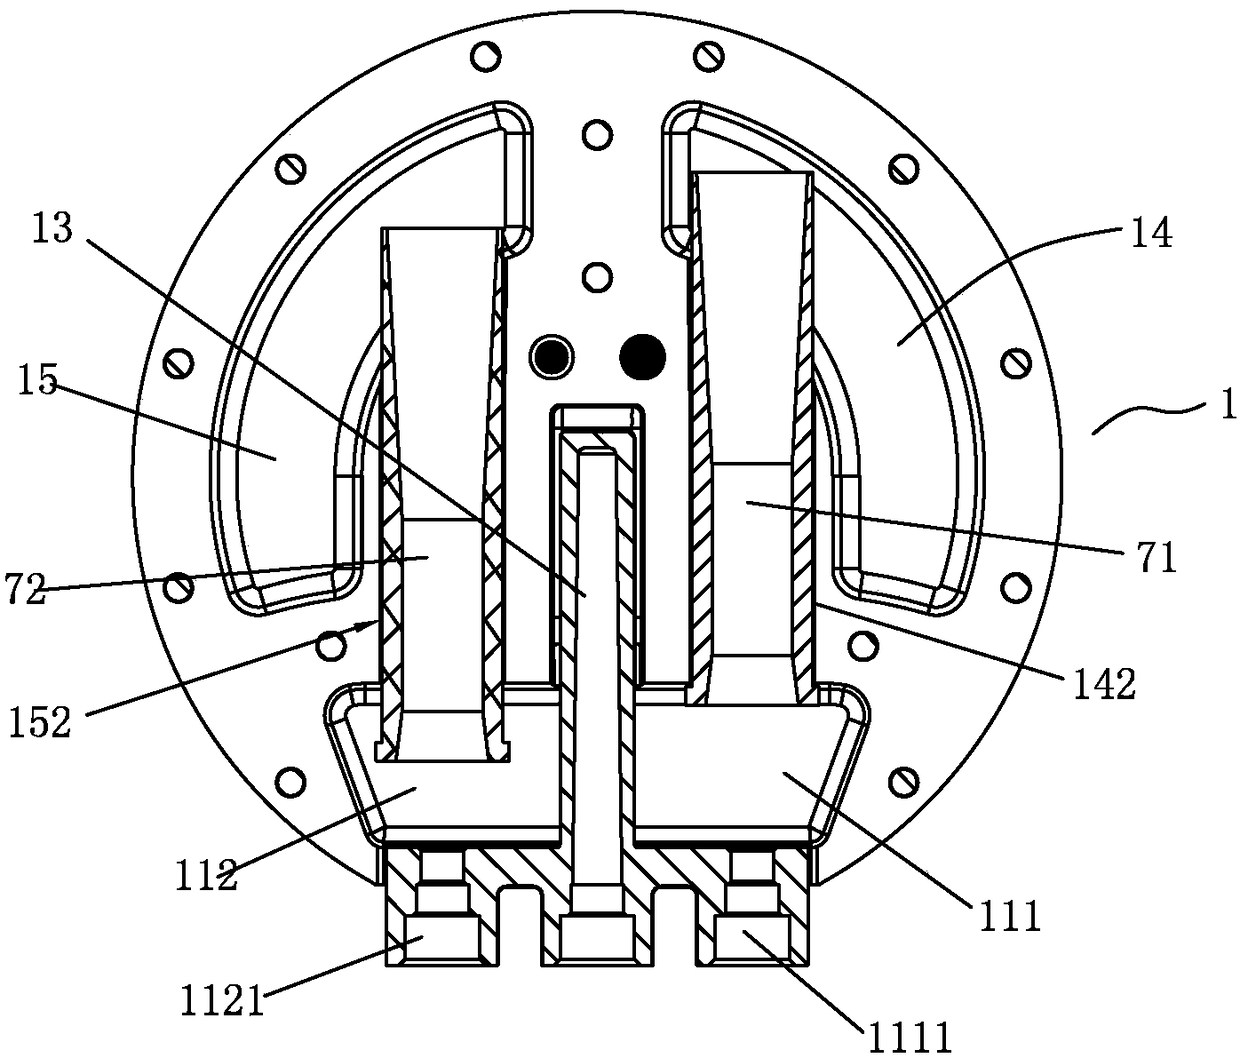 Top-intake three-fire-ring high-power burner capable of adjusting primary air